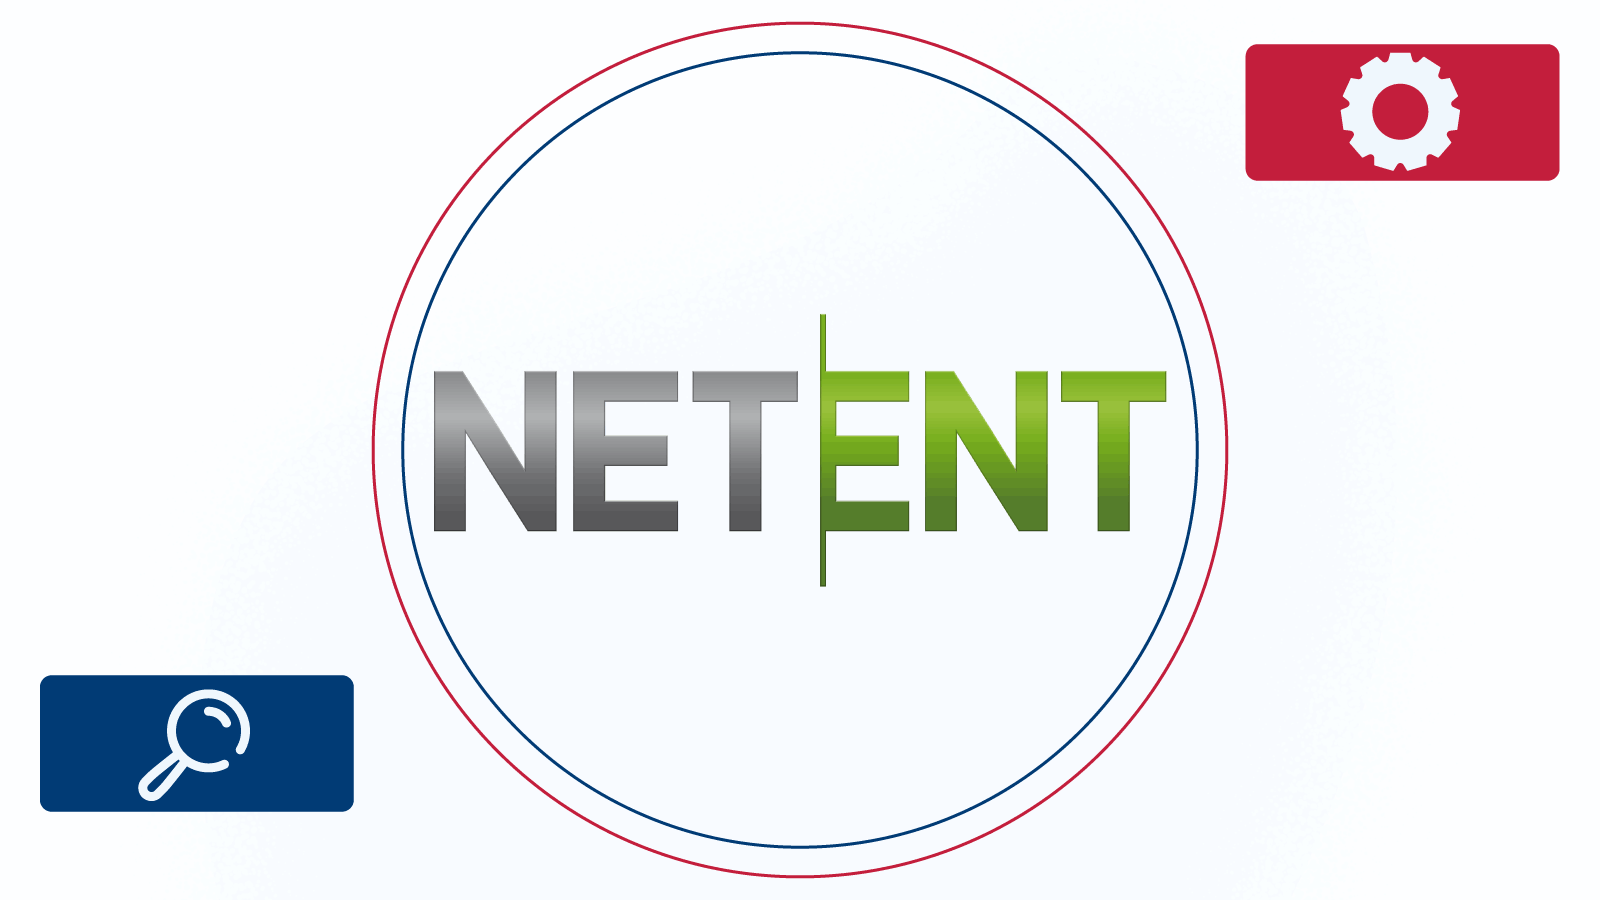 NetEnt is developing several types of Live Games